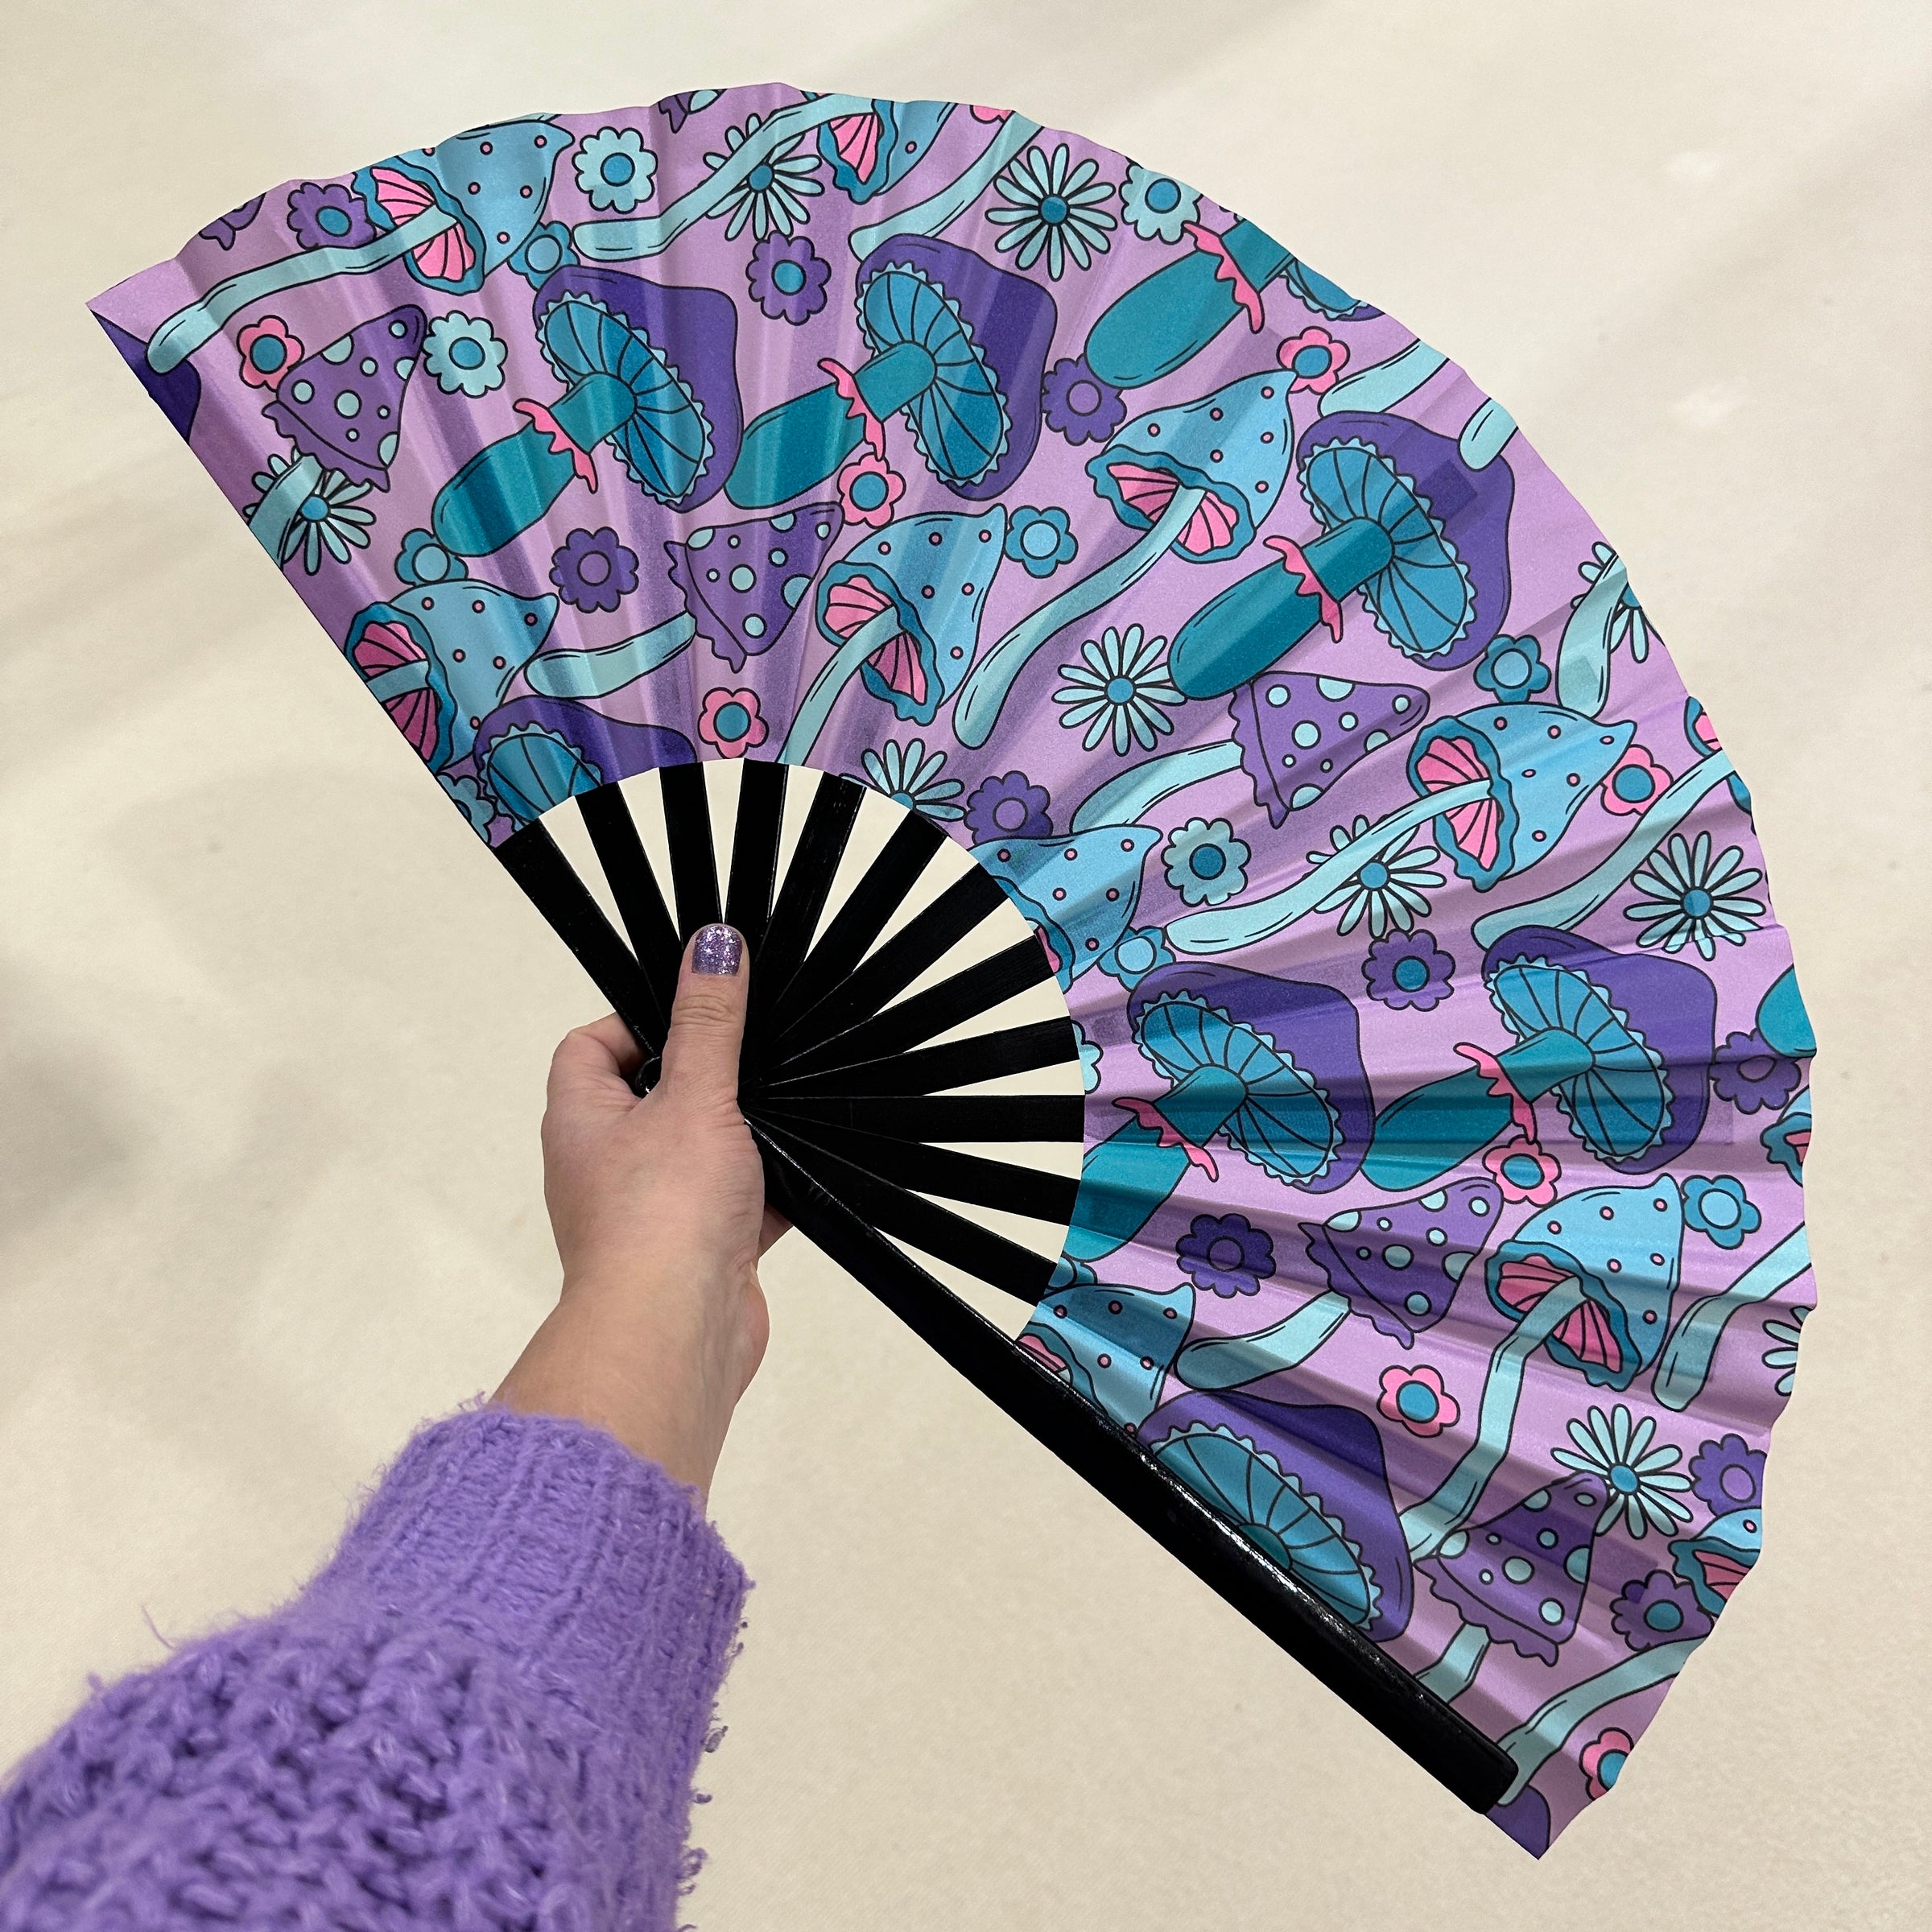 Giant Clacking Hand Fan with Purple & Teal Toadstools Print (Glows in UV!)